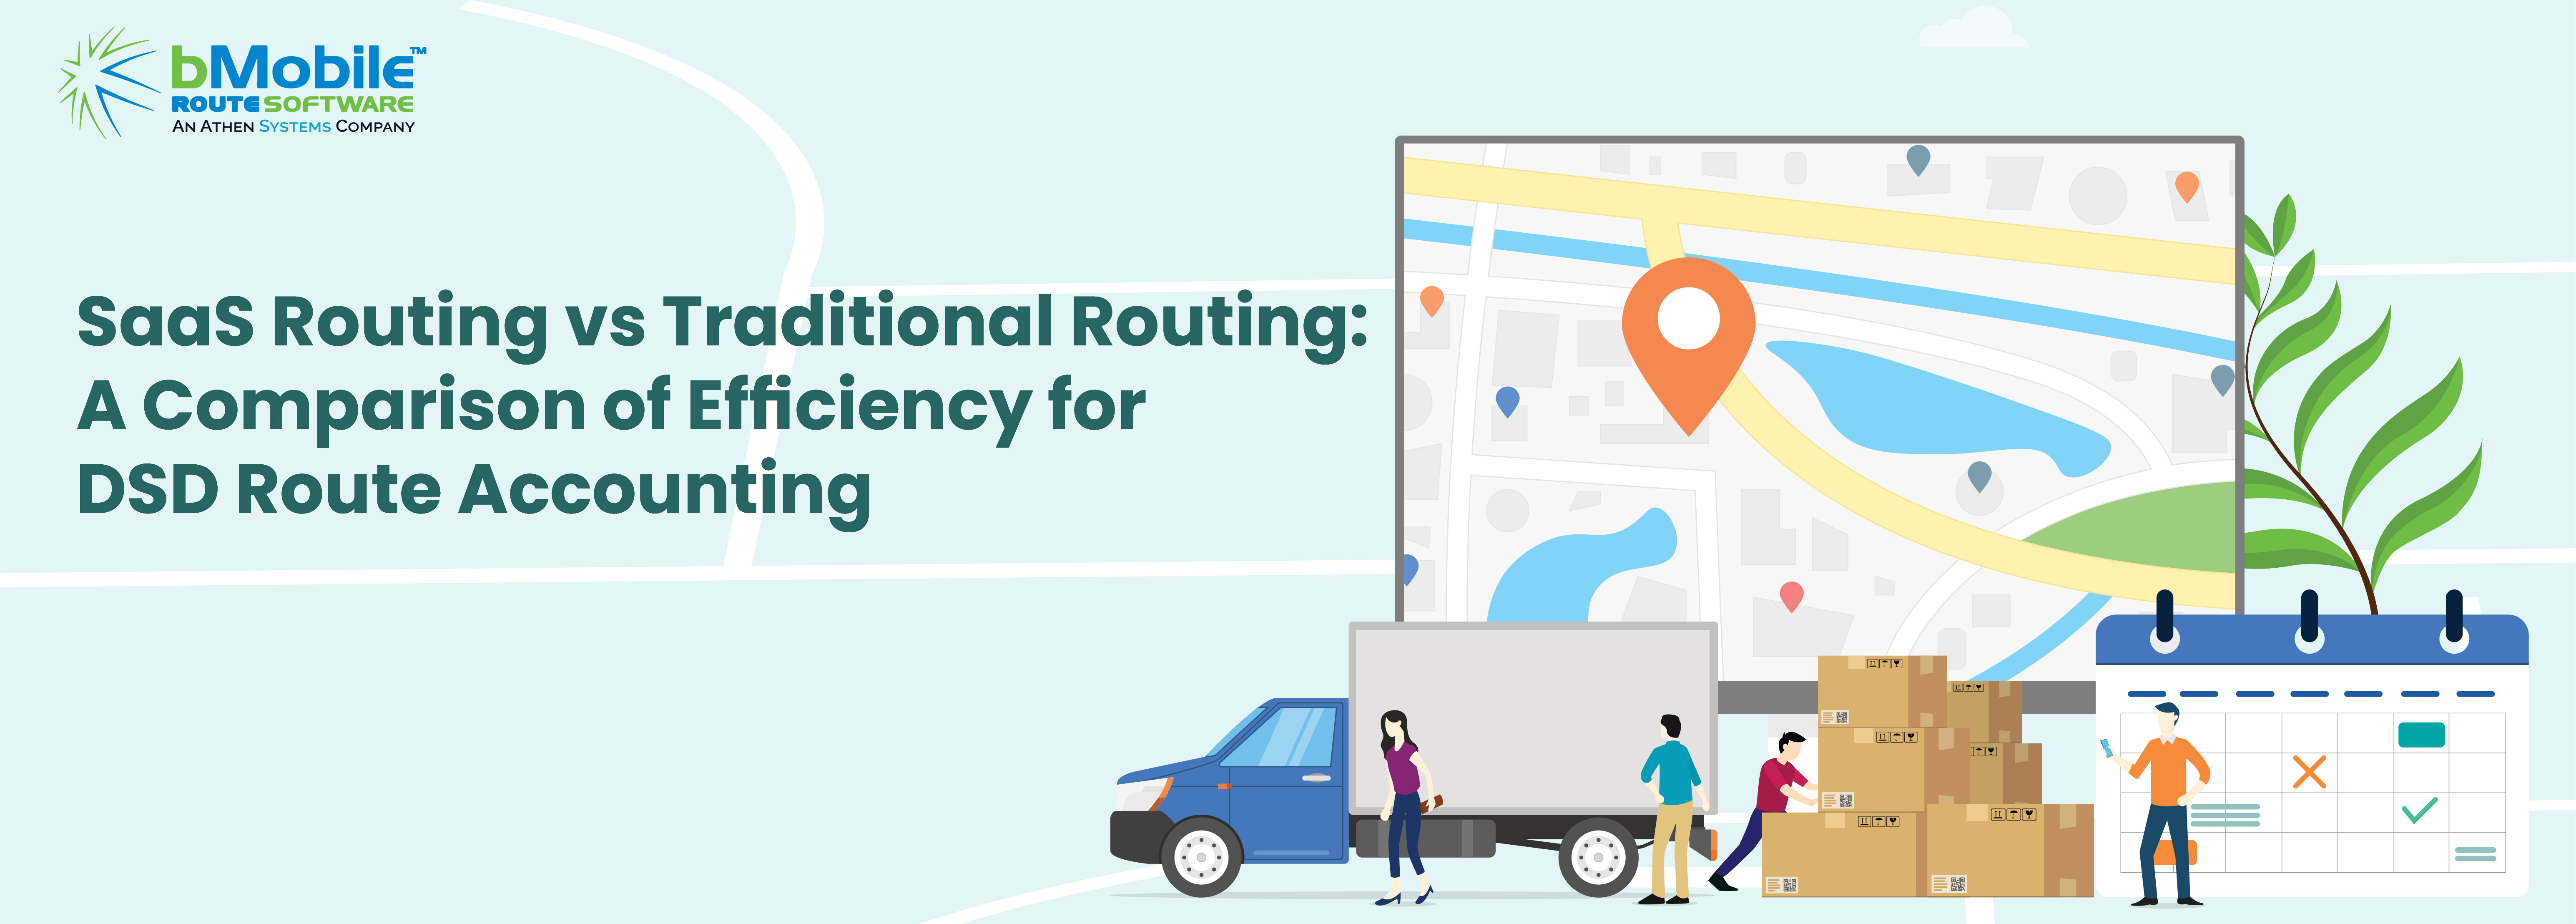 SaaS Routing vs Traditional Routing: A Comparison of Efficiency for DSD Route Accounting